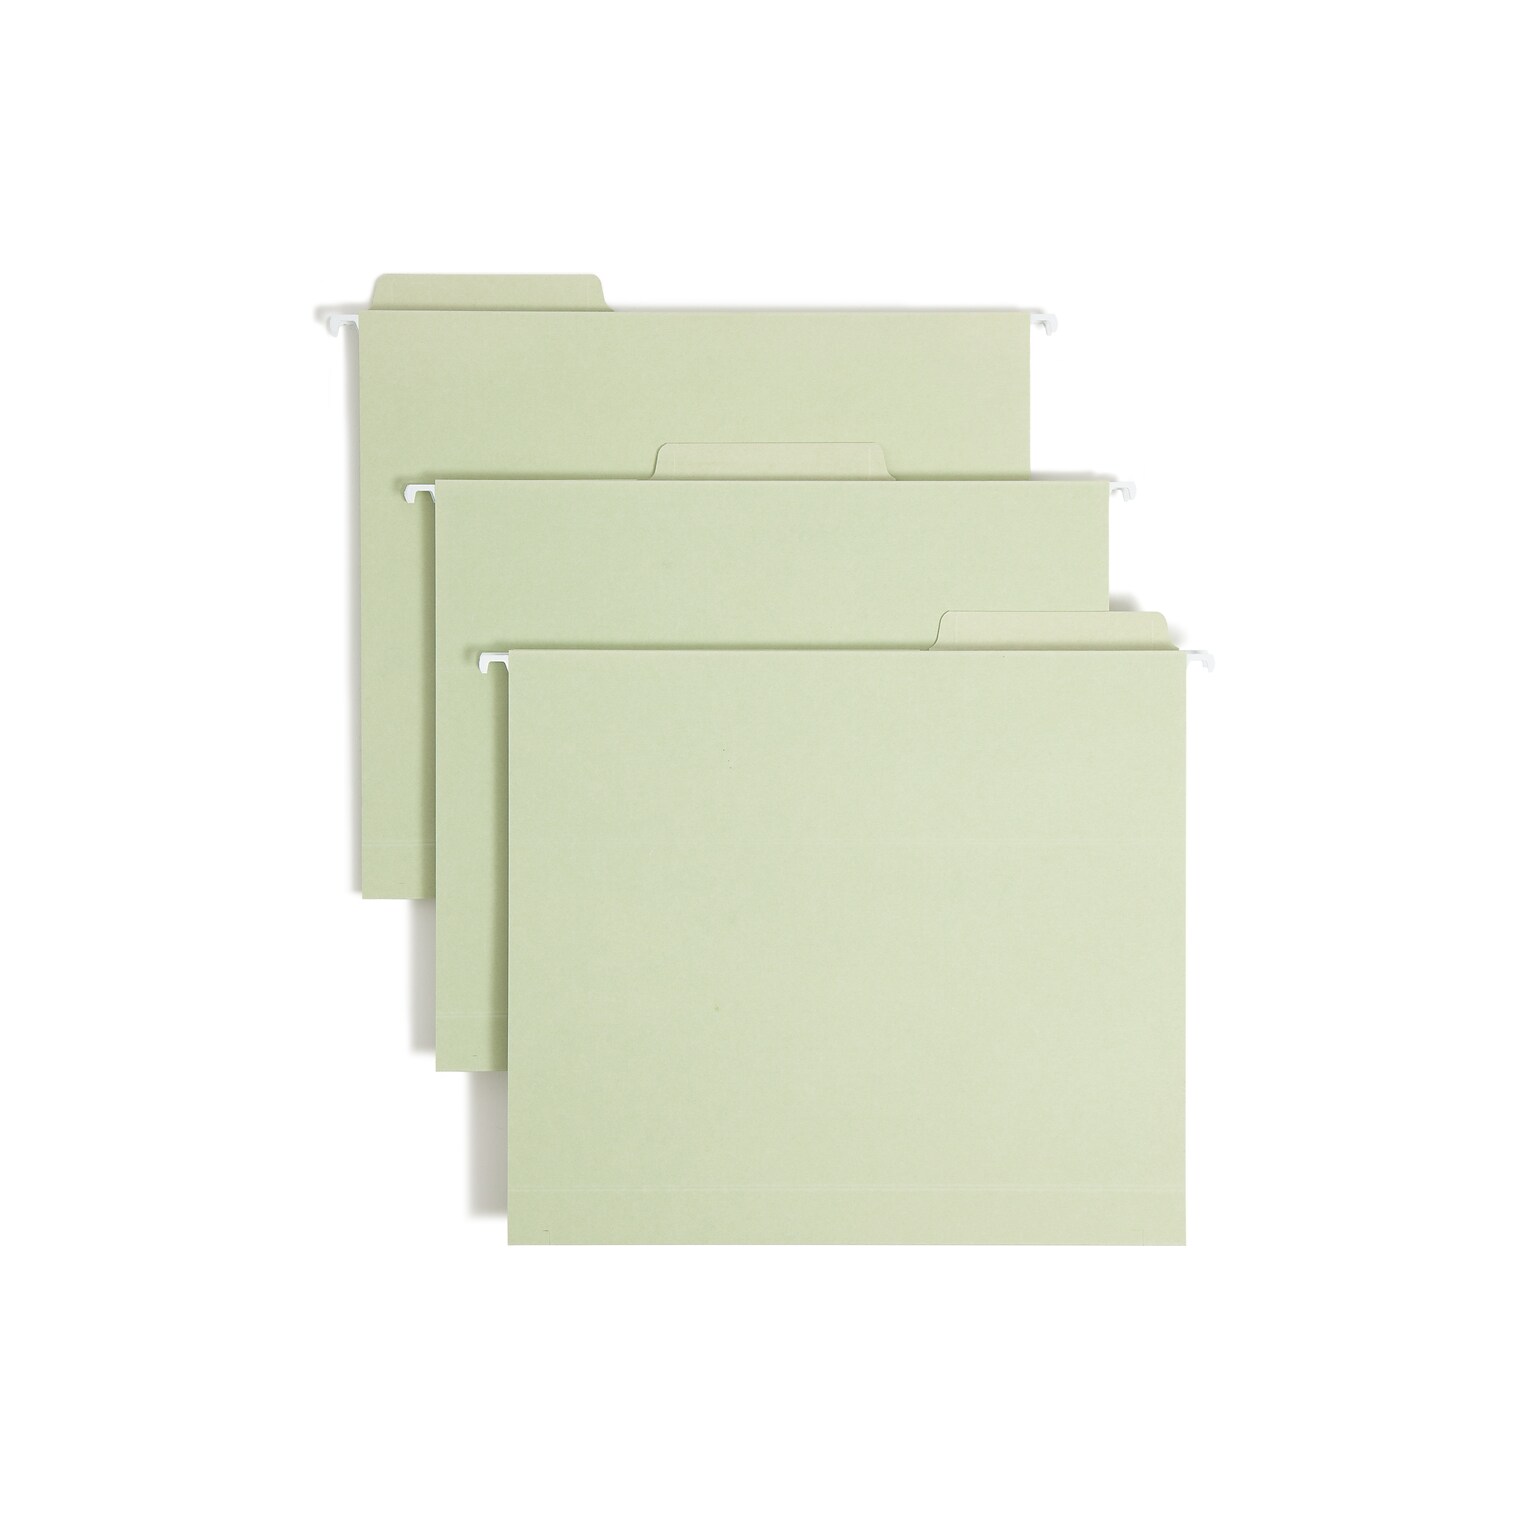 Smead FasTab Reinforced Box Bottom Hanging File Folder, 2 Expansion, 3-Tab Tab, Letter Size, Moss, 20/Box (64201)